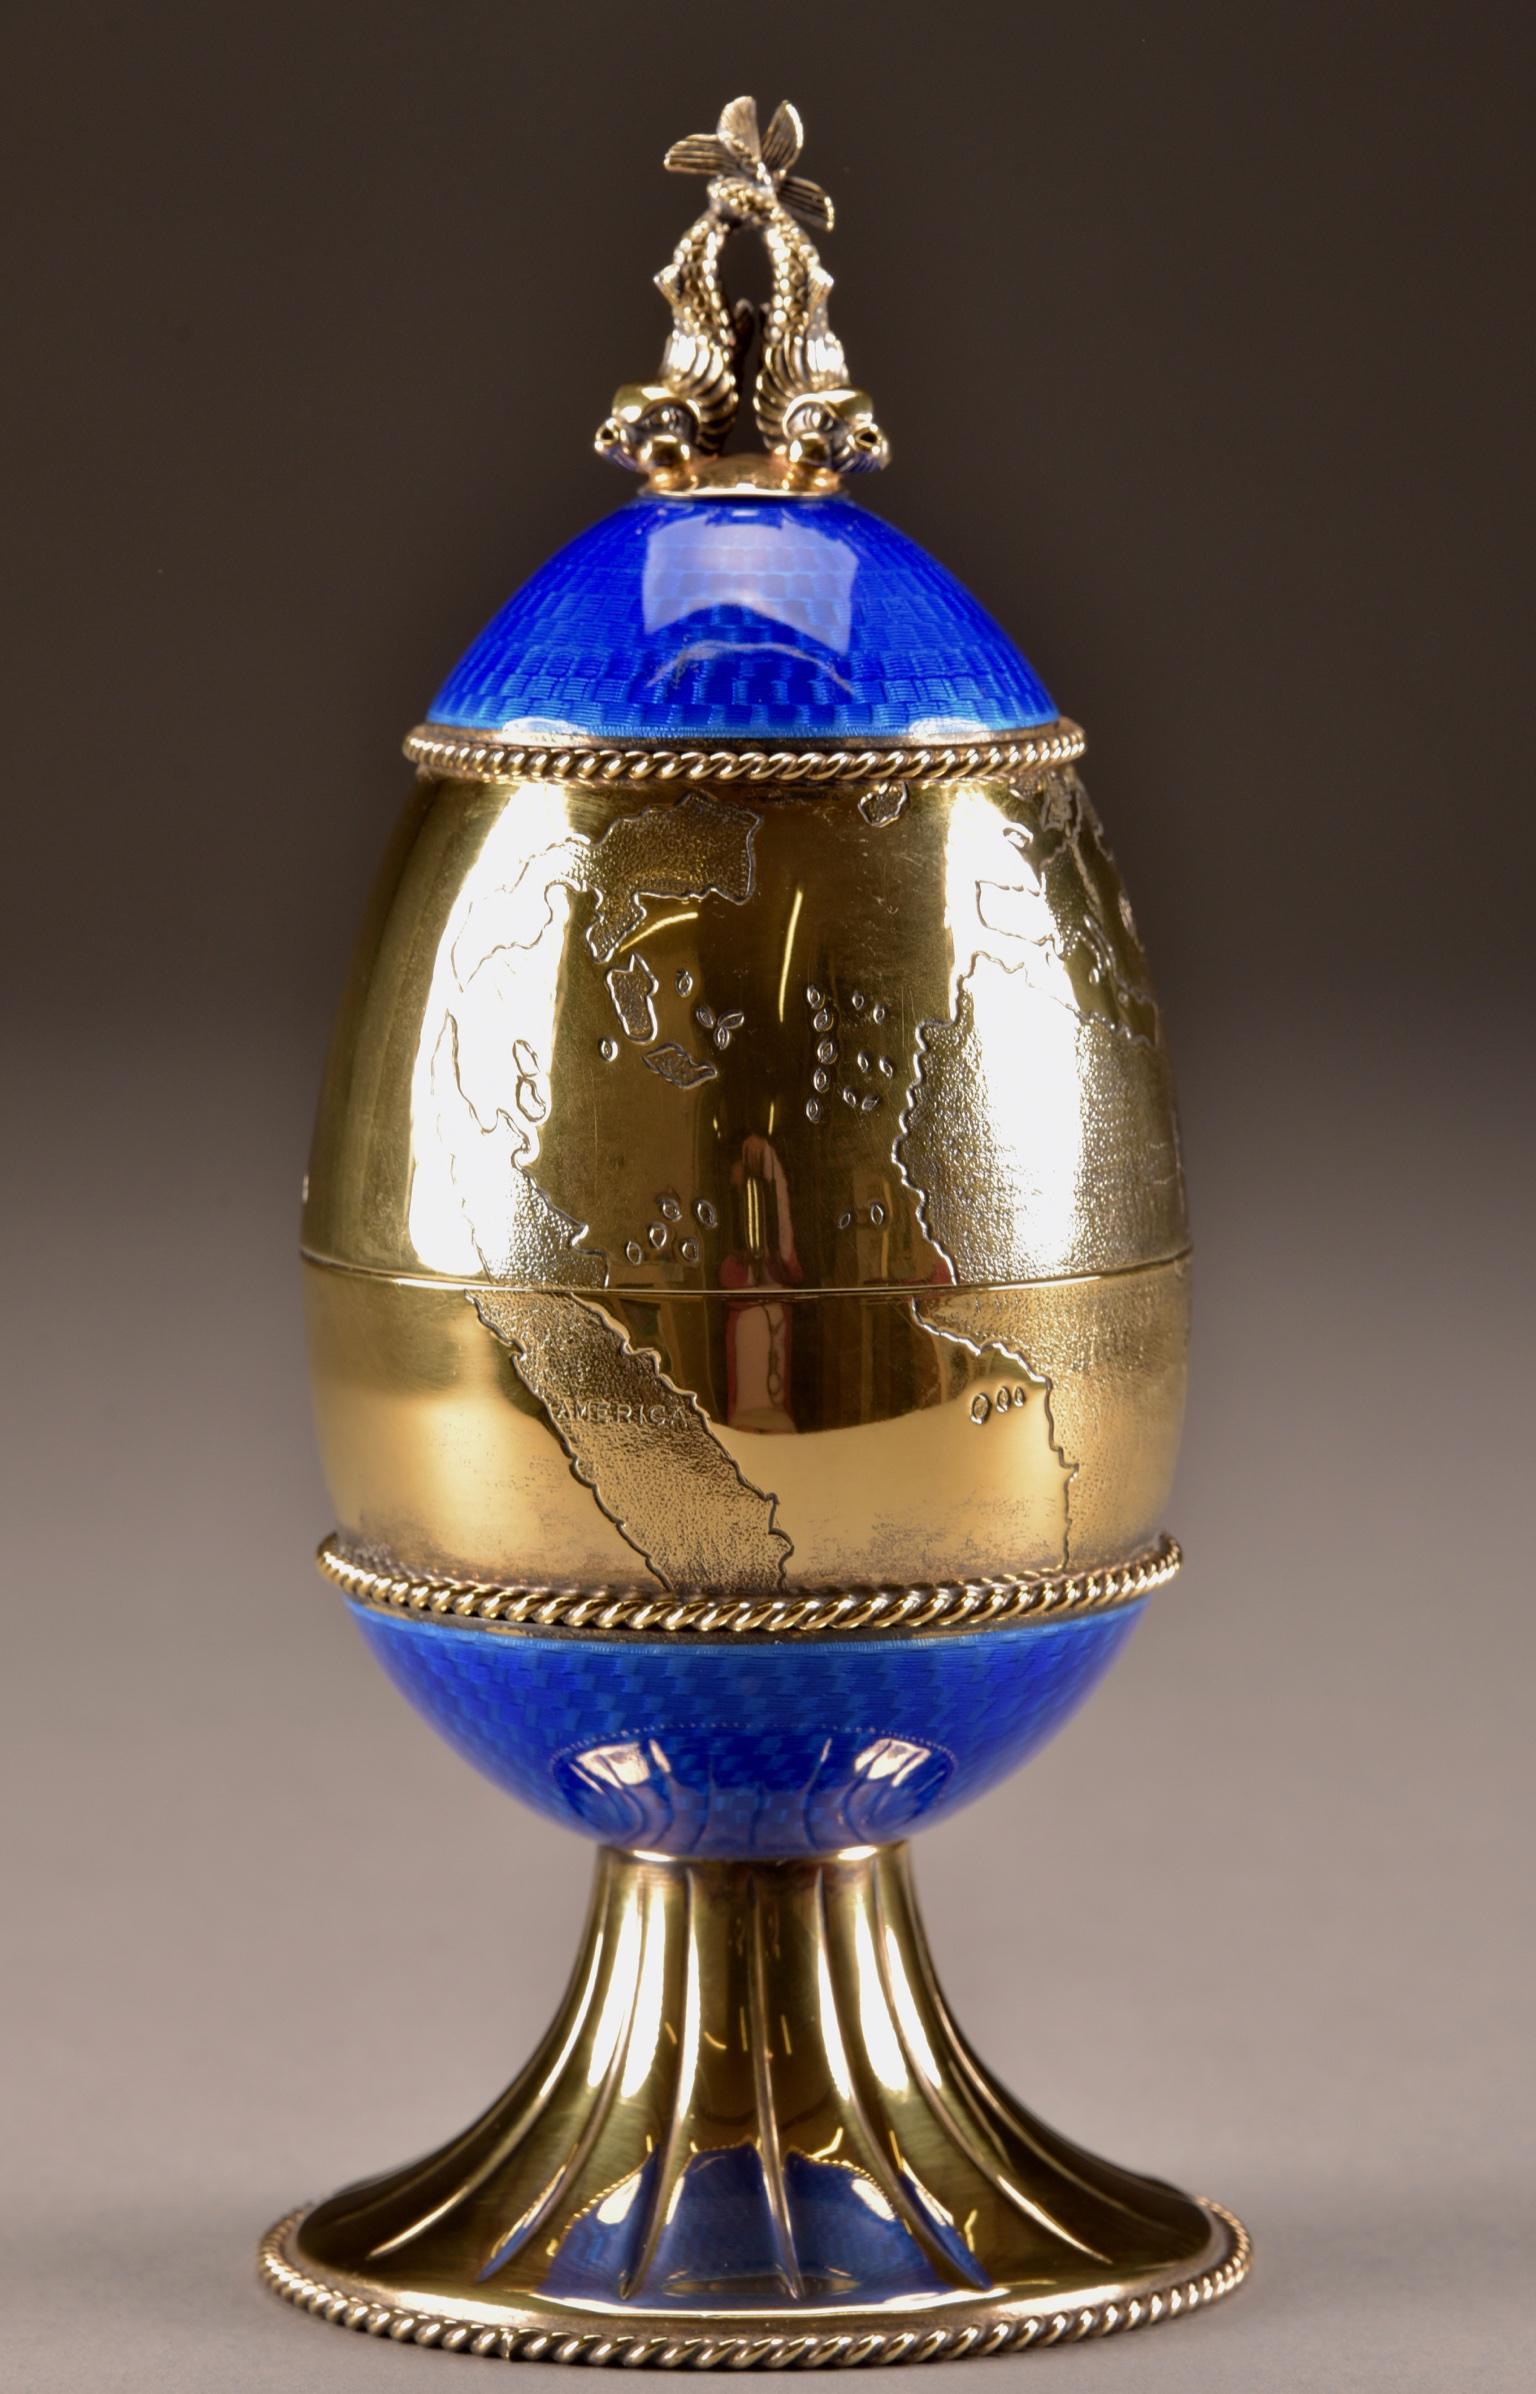 theo faberge egg price